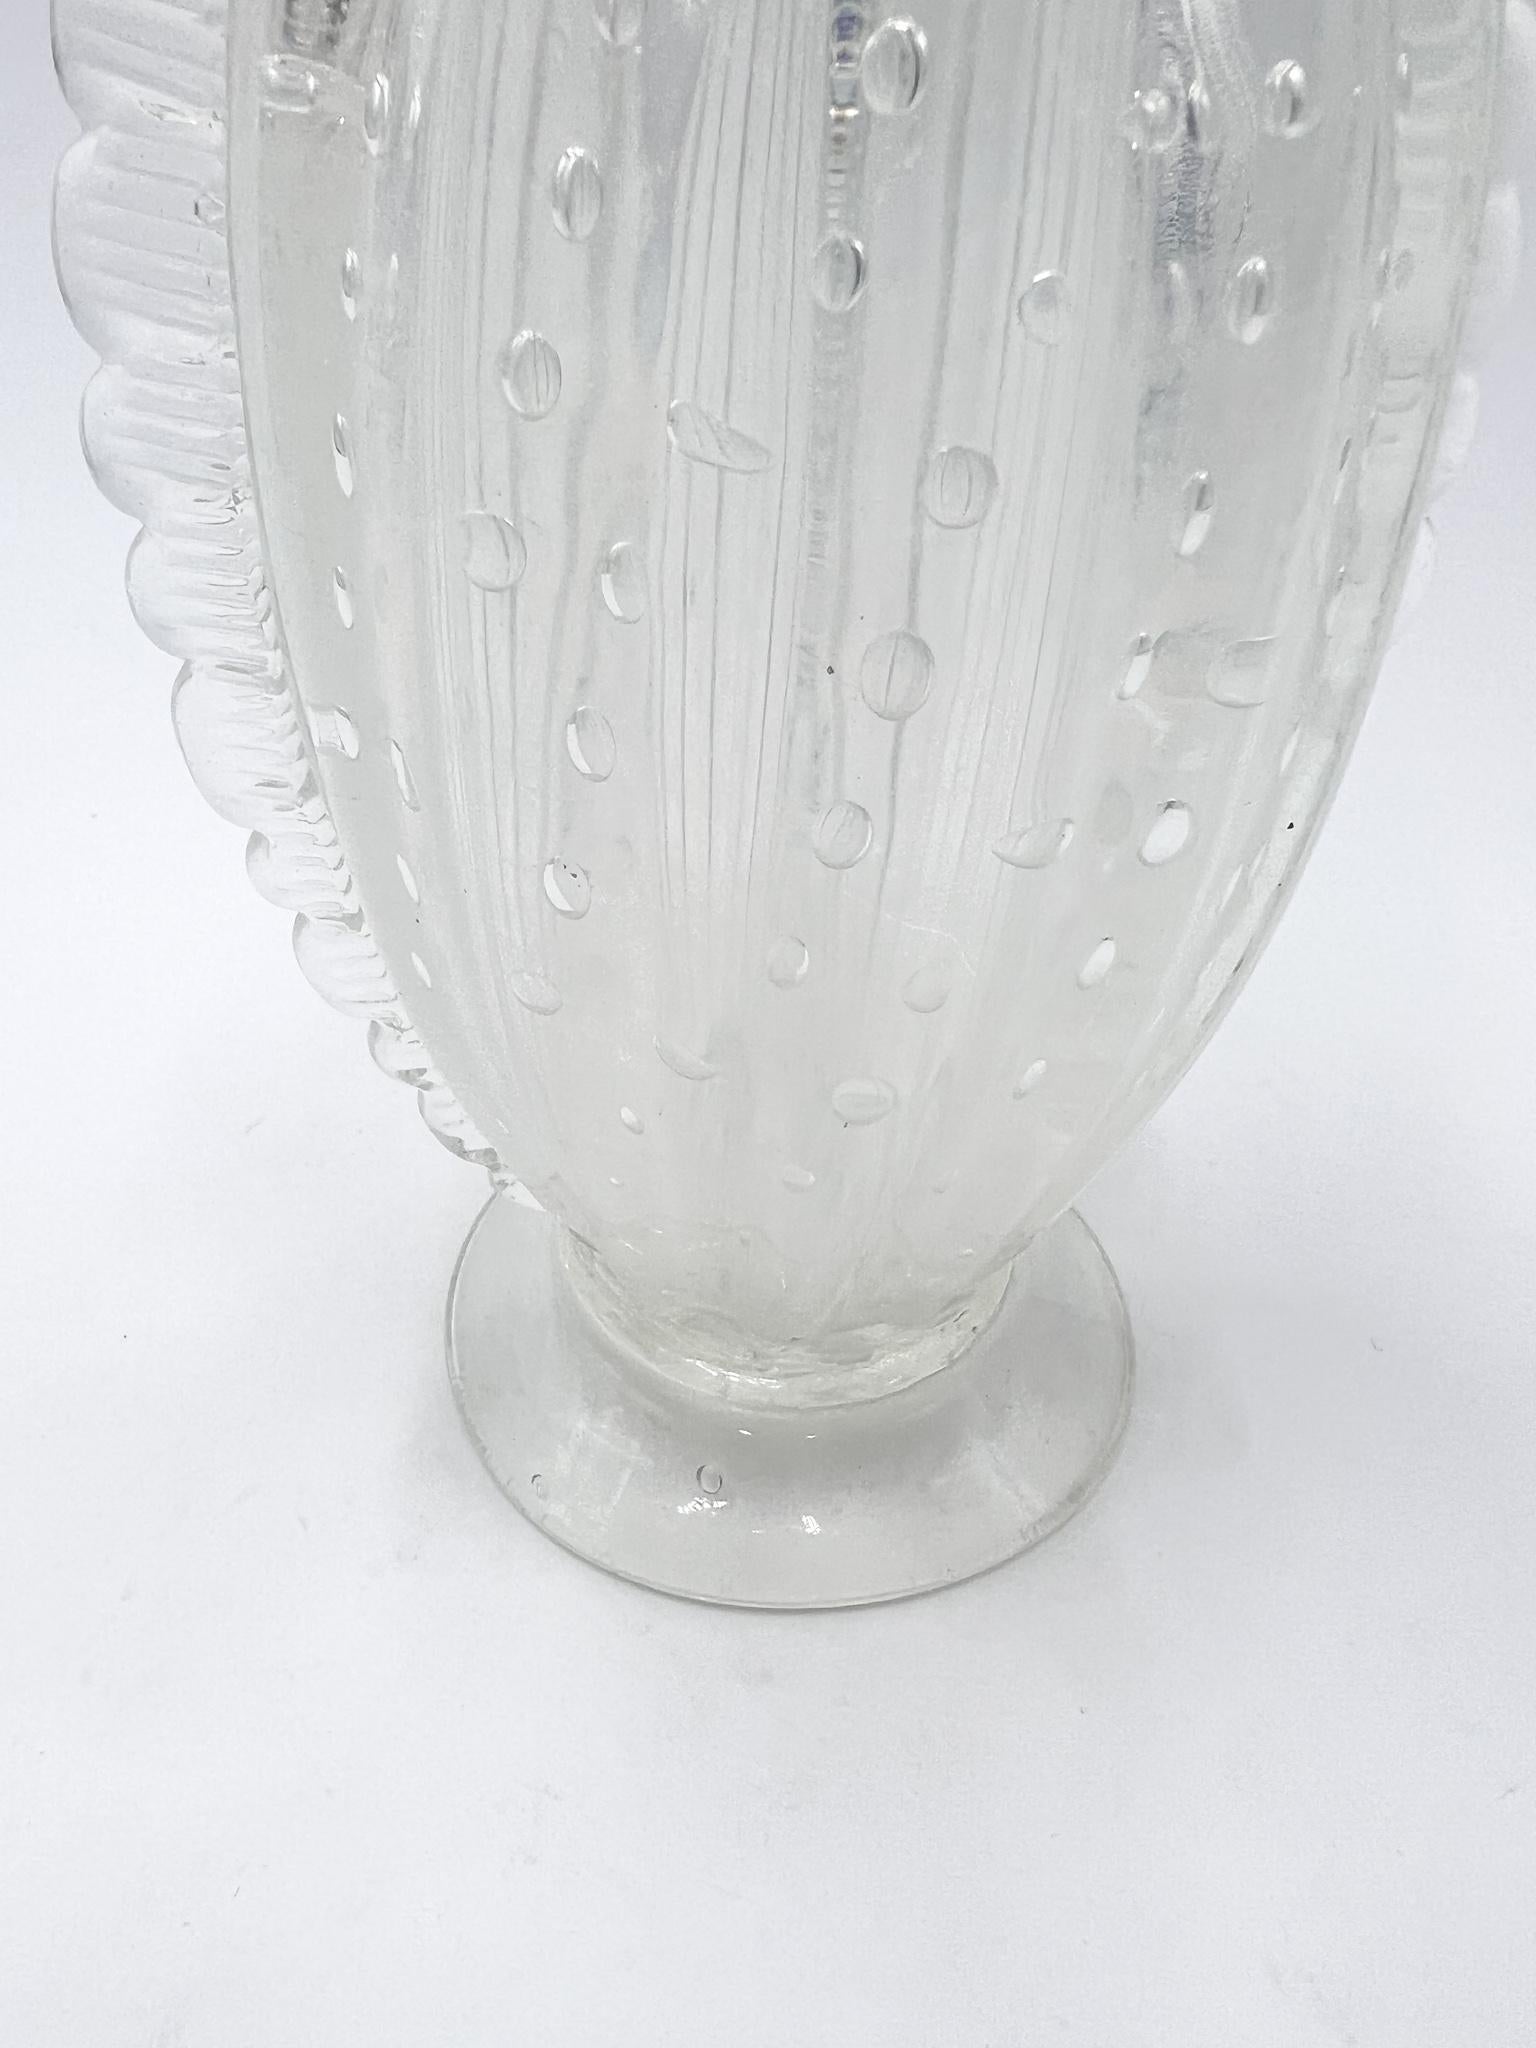 Mid-Century Modern Murano Glass Vase by Barovier from the 1960s